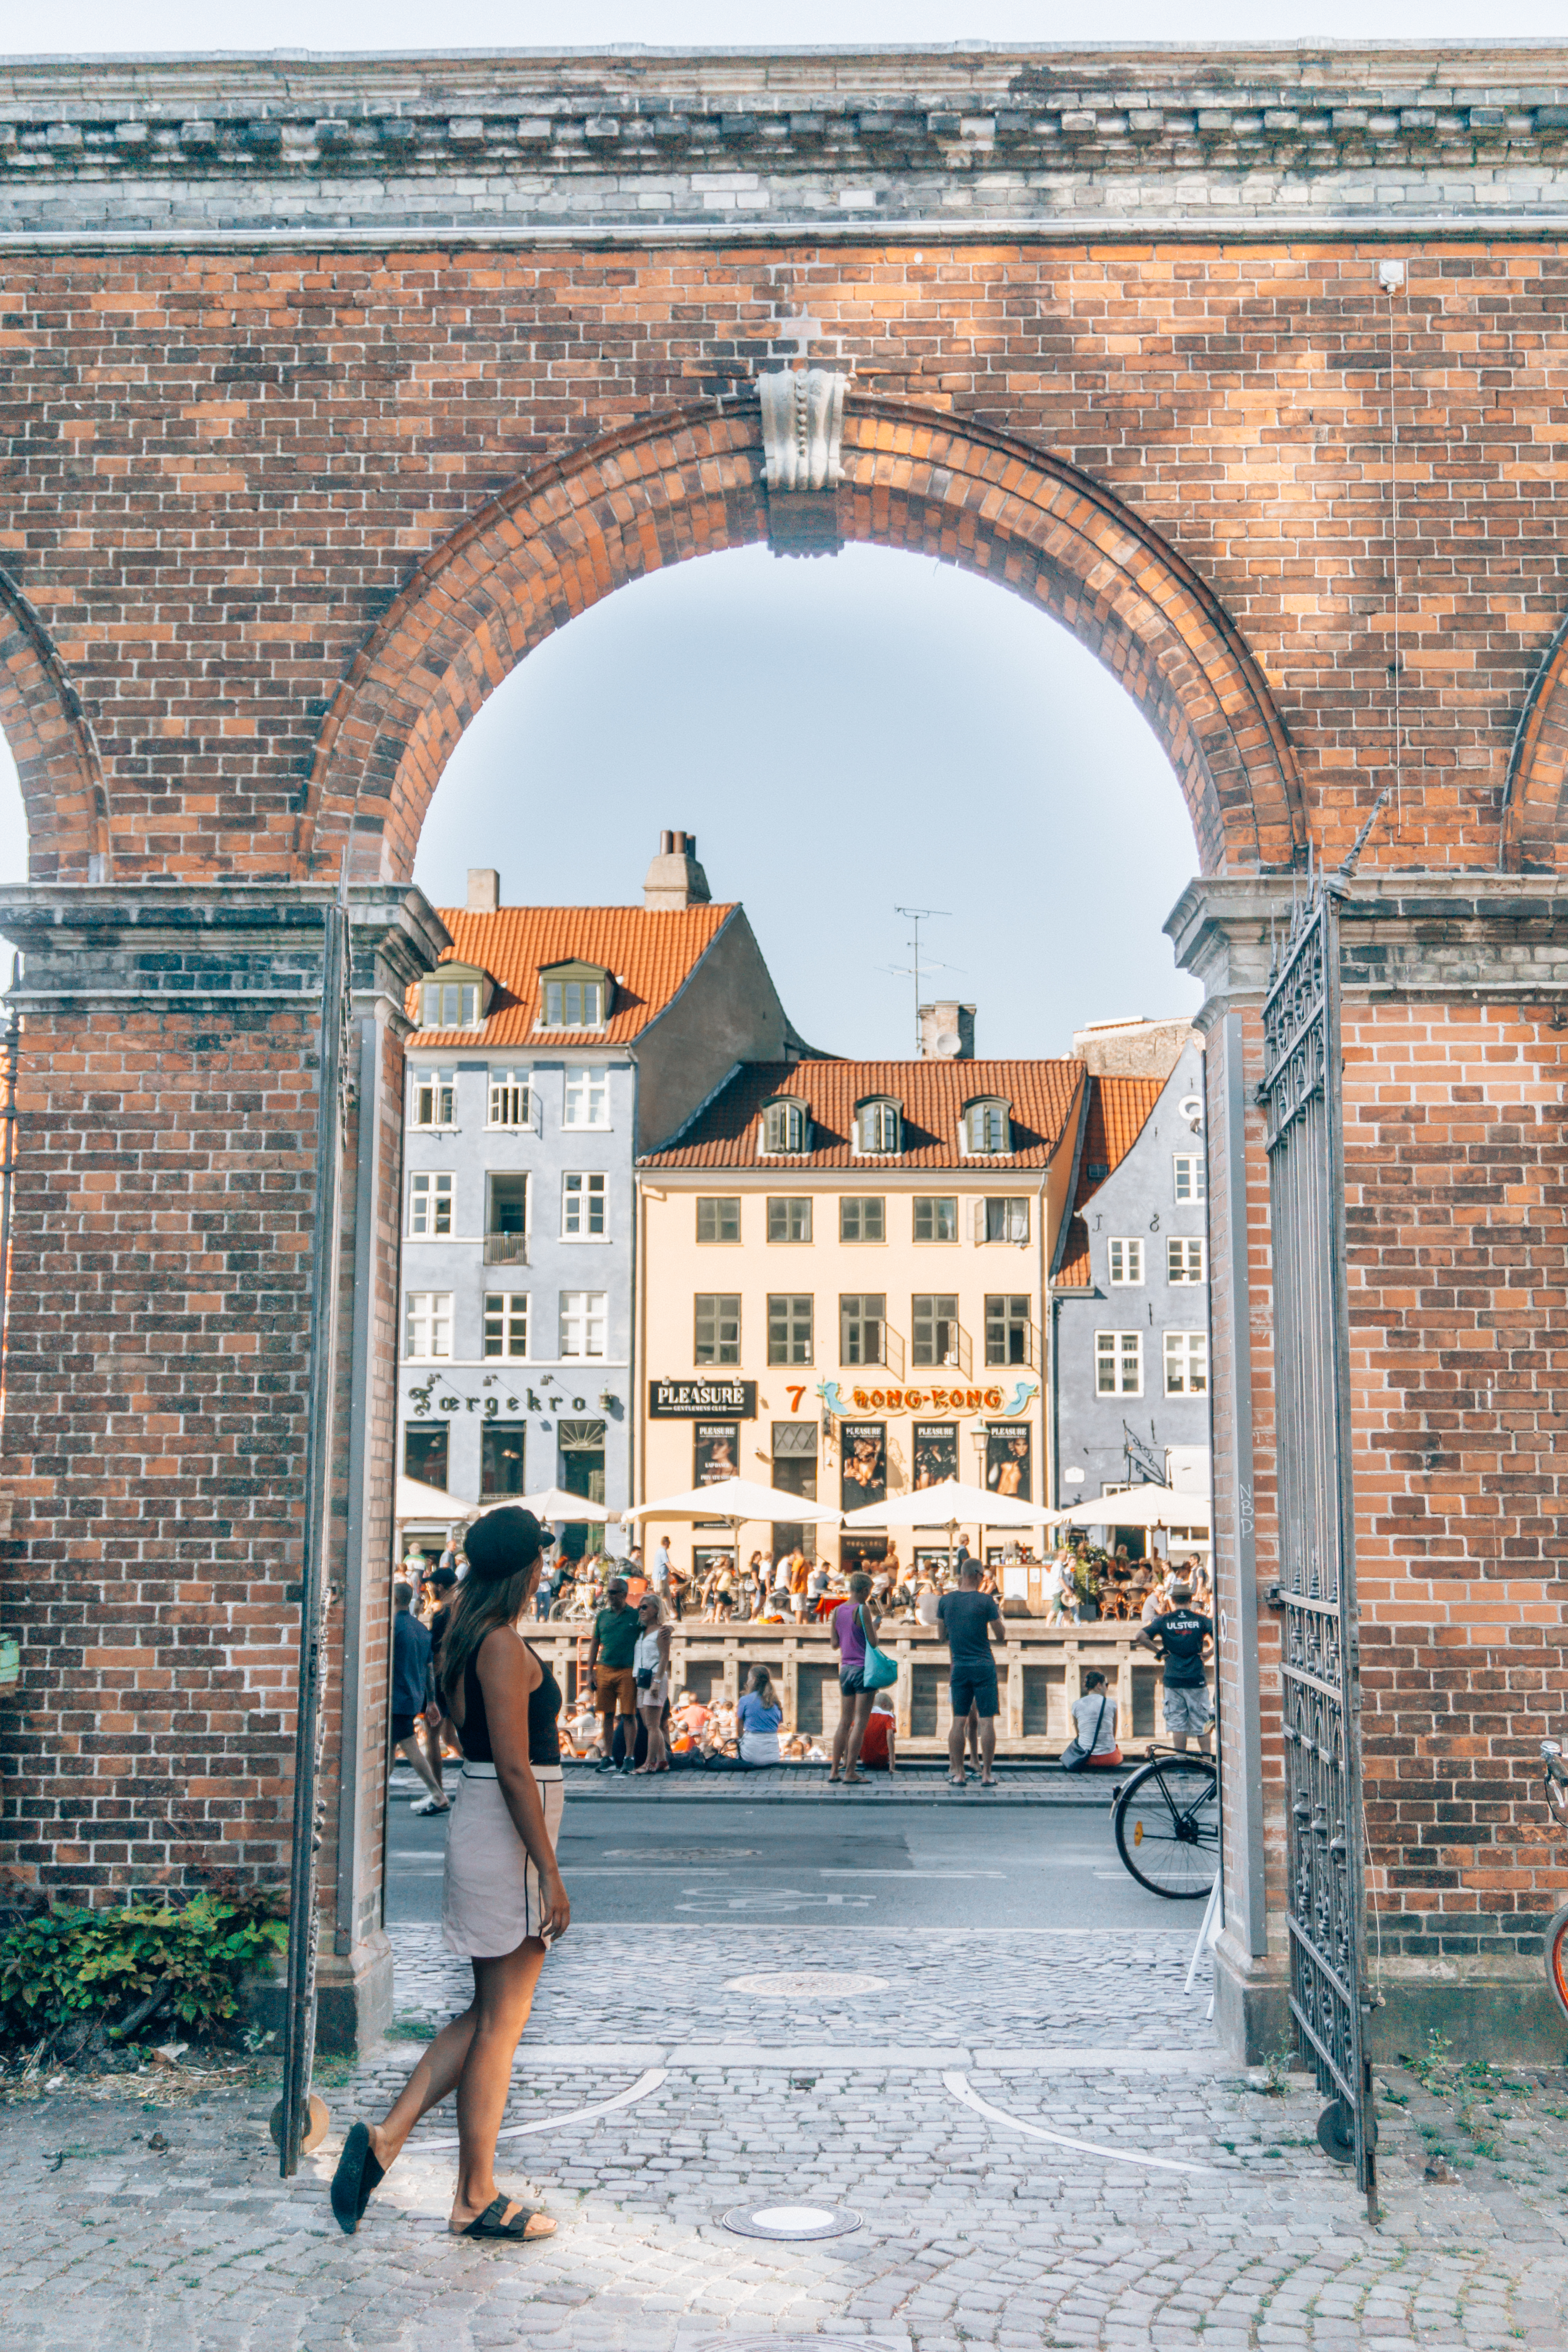 A girl admires the bustling Nyhavn waterfront district in Copenhagen from behind an old brick archway.